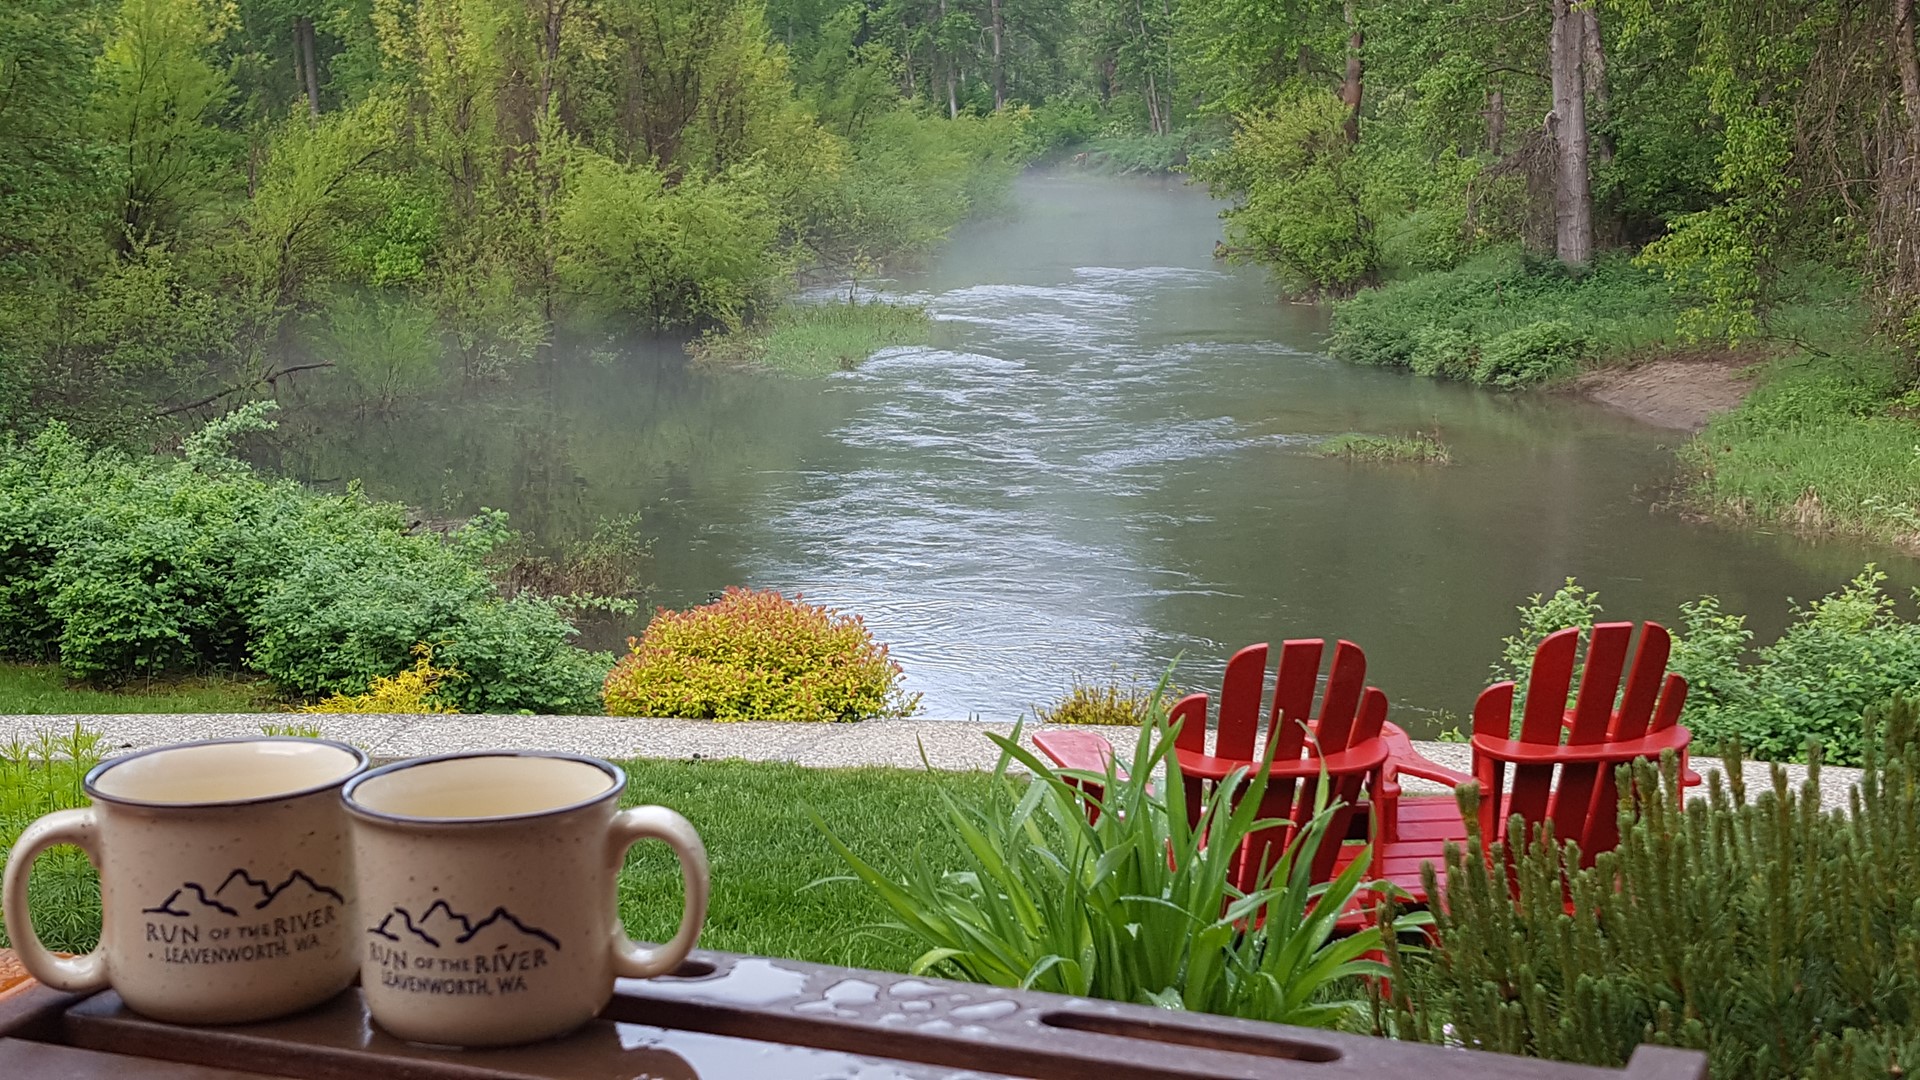 If you need an escape, this bed & breakfast knows how to treat its guests right. Run of the River Inn and Refuge won Best Bed and Breakfast in 2019's Best Northwest Escapes.